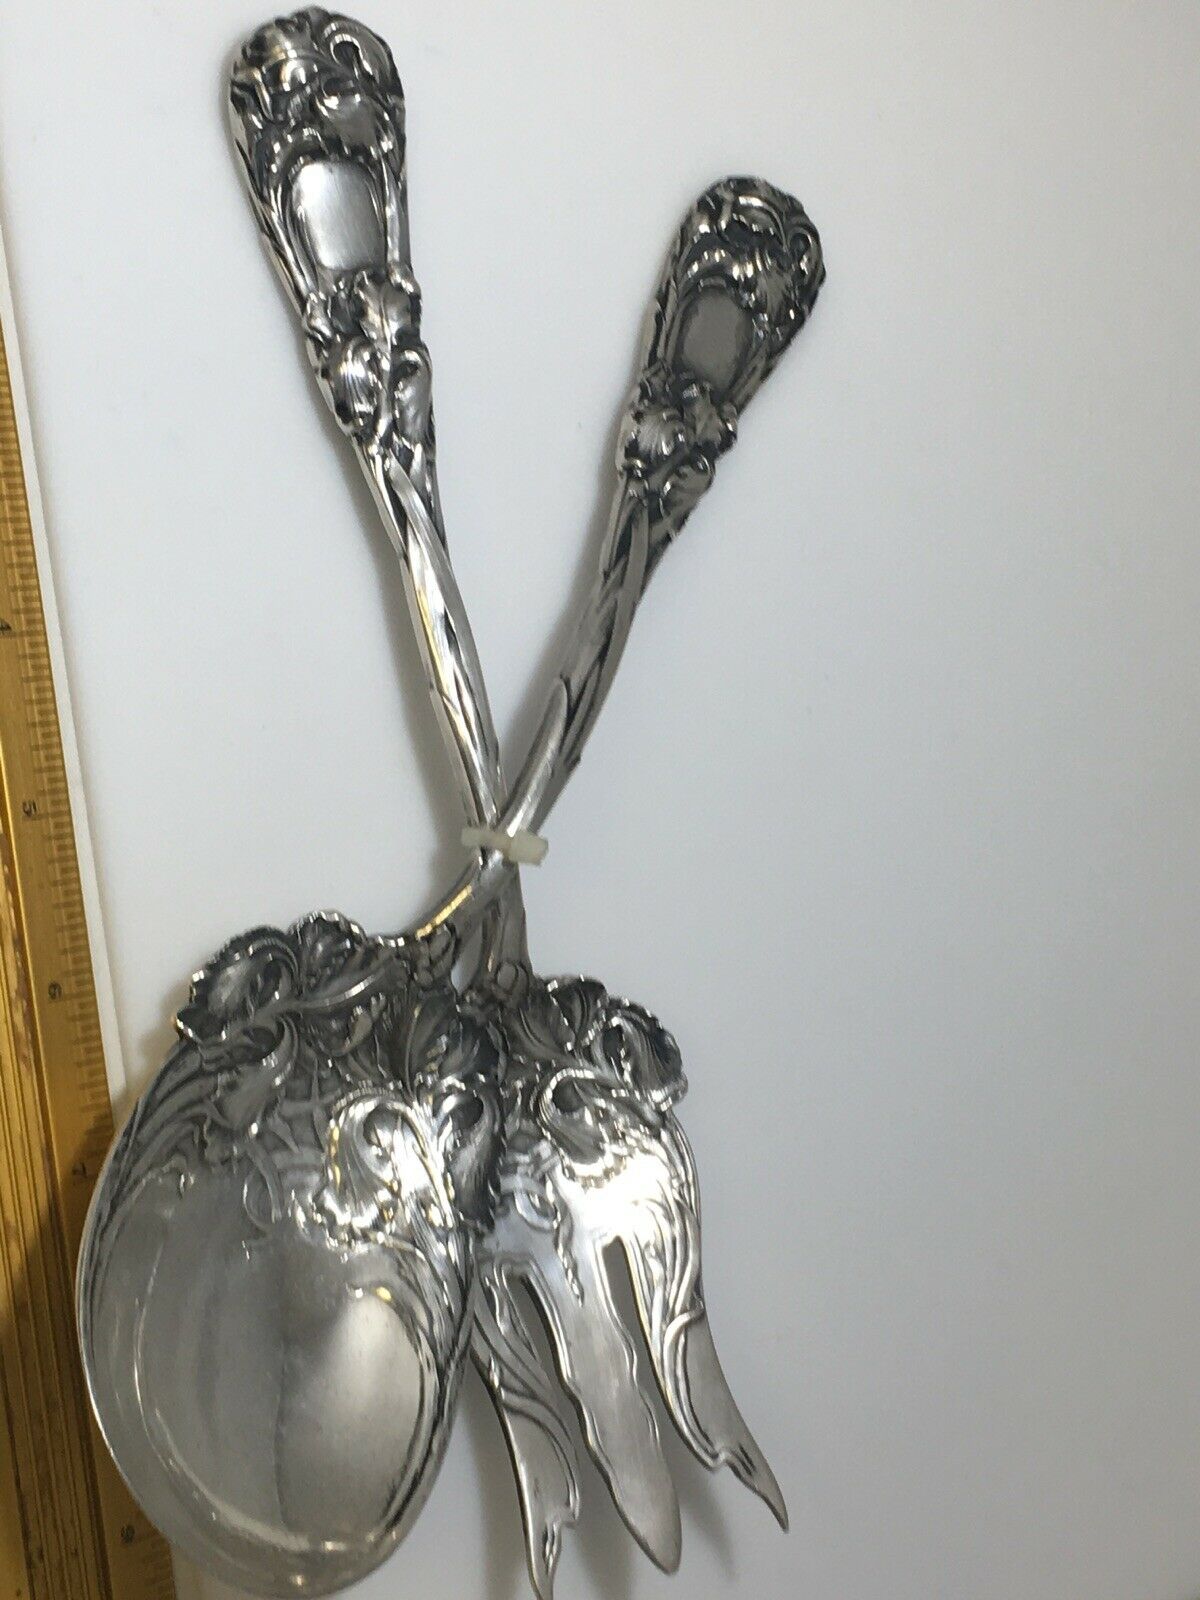 New Art By Durgin 2 Pc Salad Serving Set Spoon & Fork Heavy Over 12 Oz No Mono